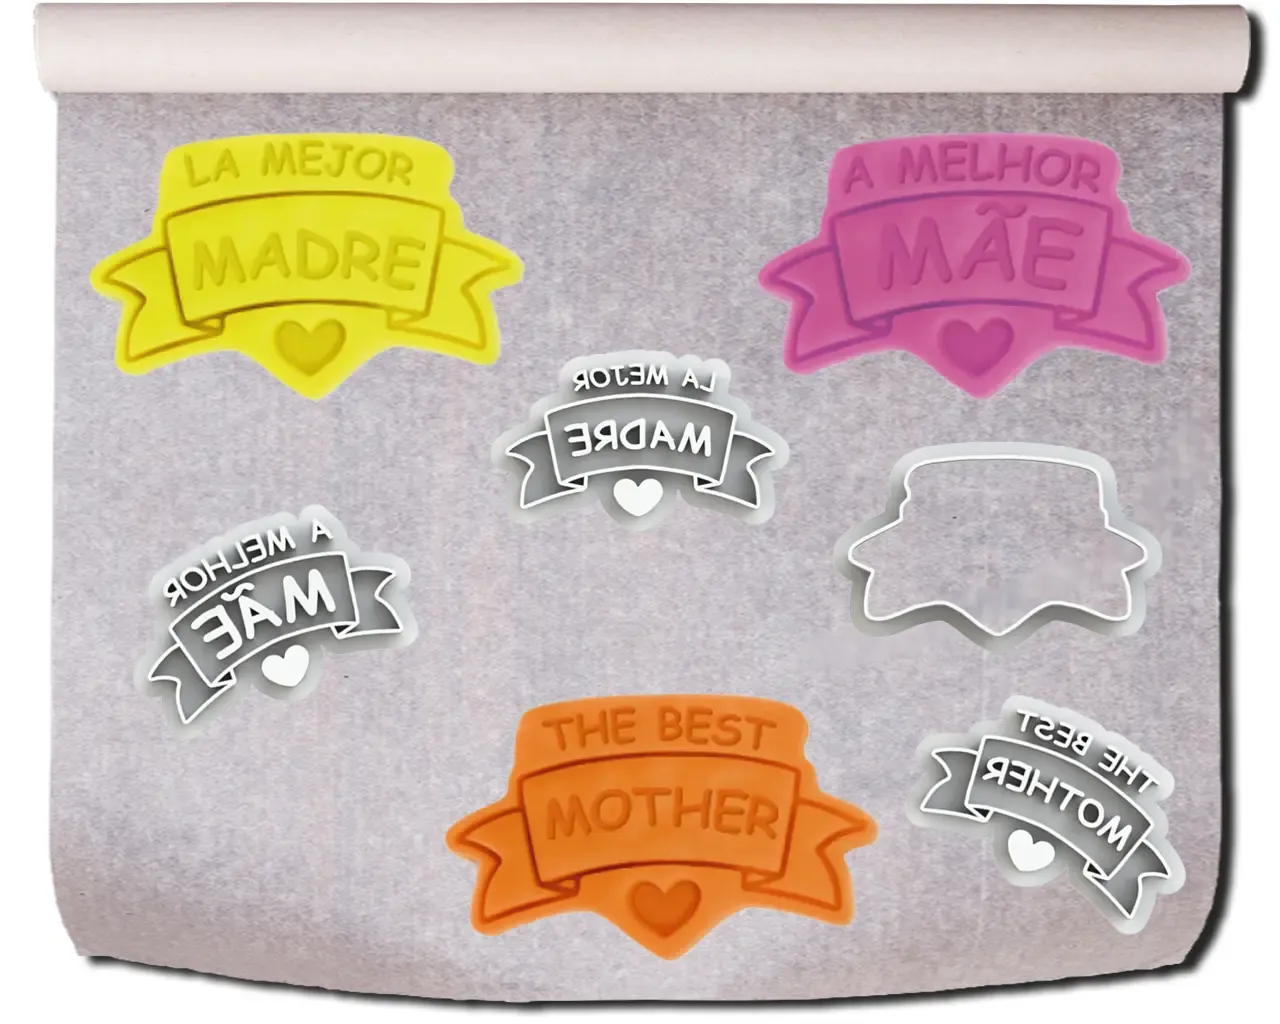 MOTHER'S DAY COOKIE CUTTER WITH MESSAGE STAMP